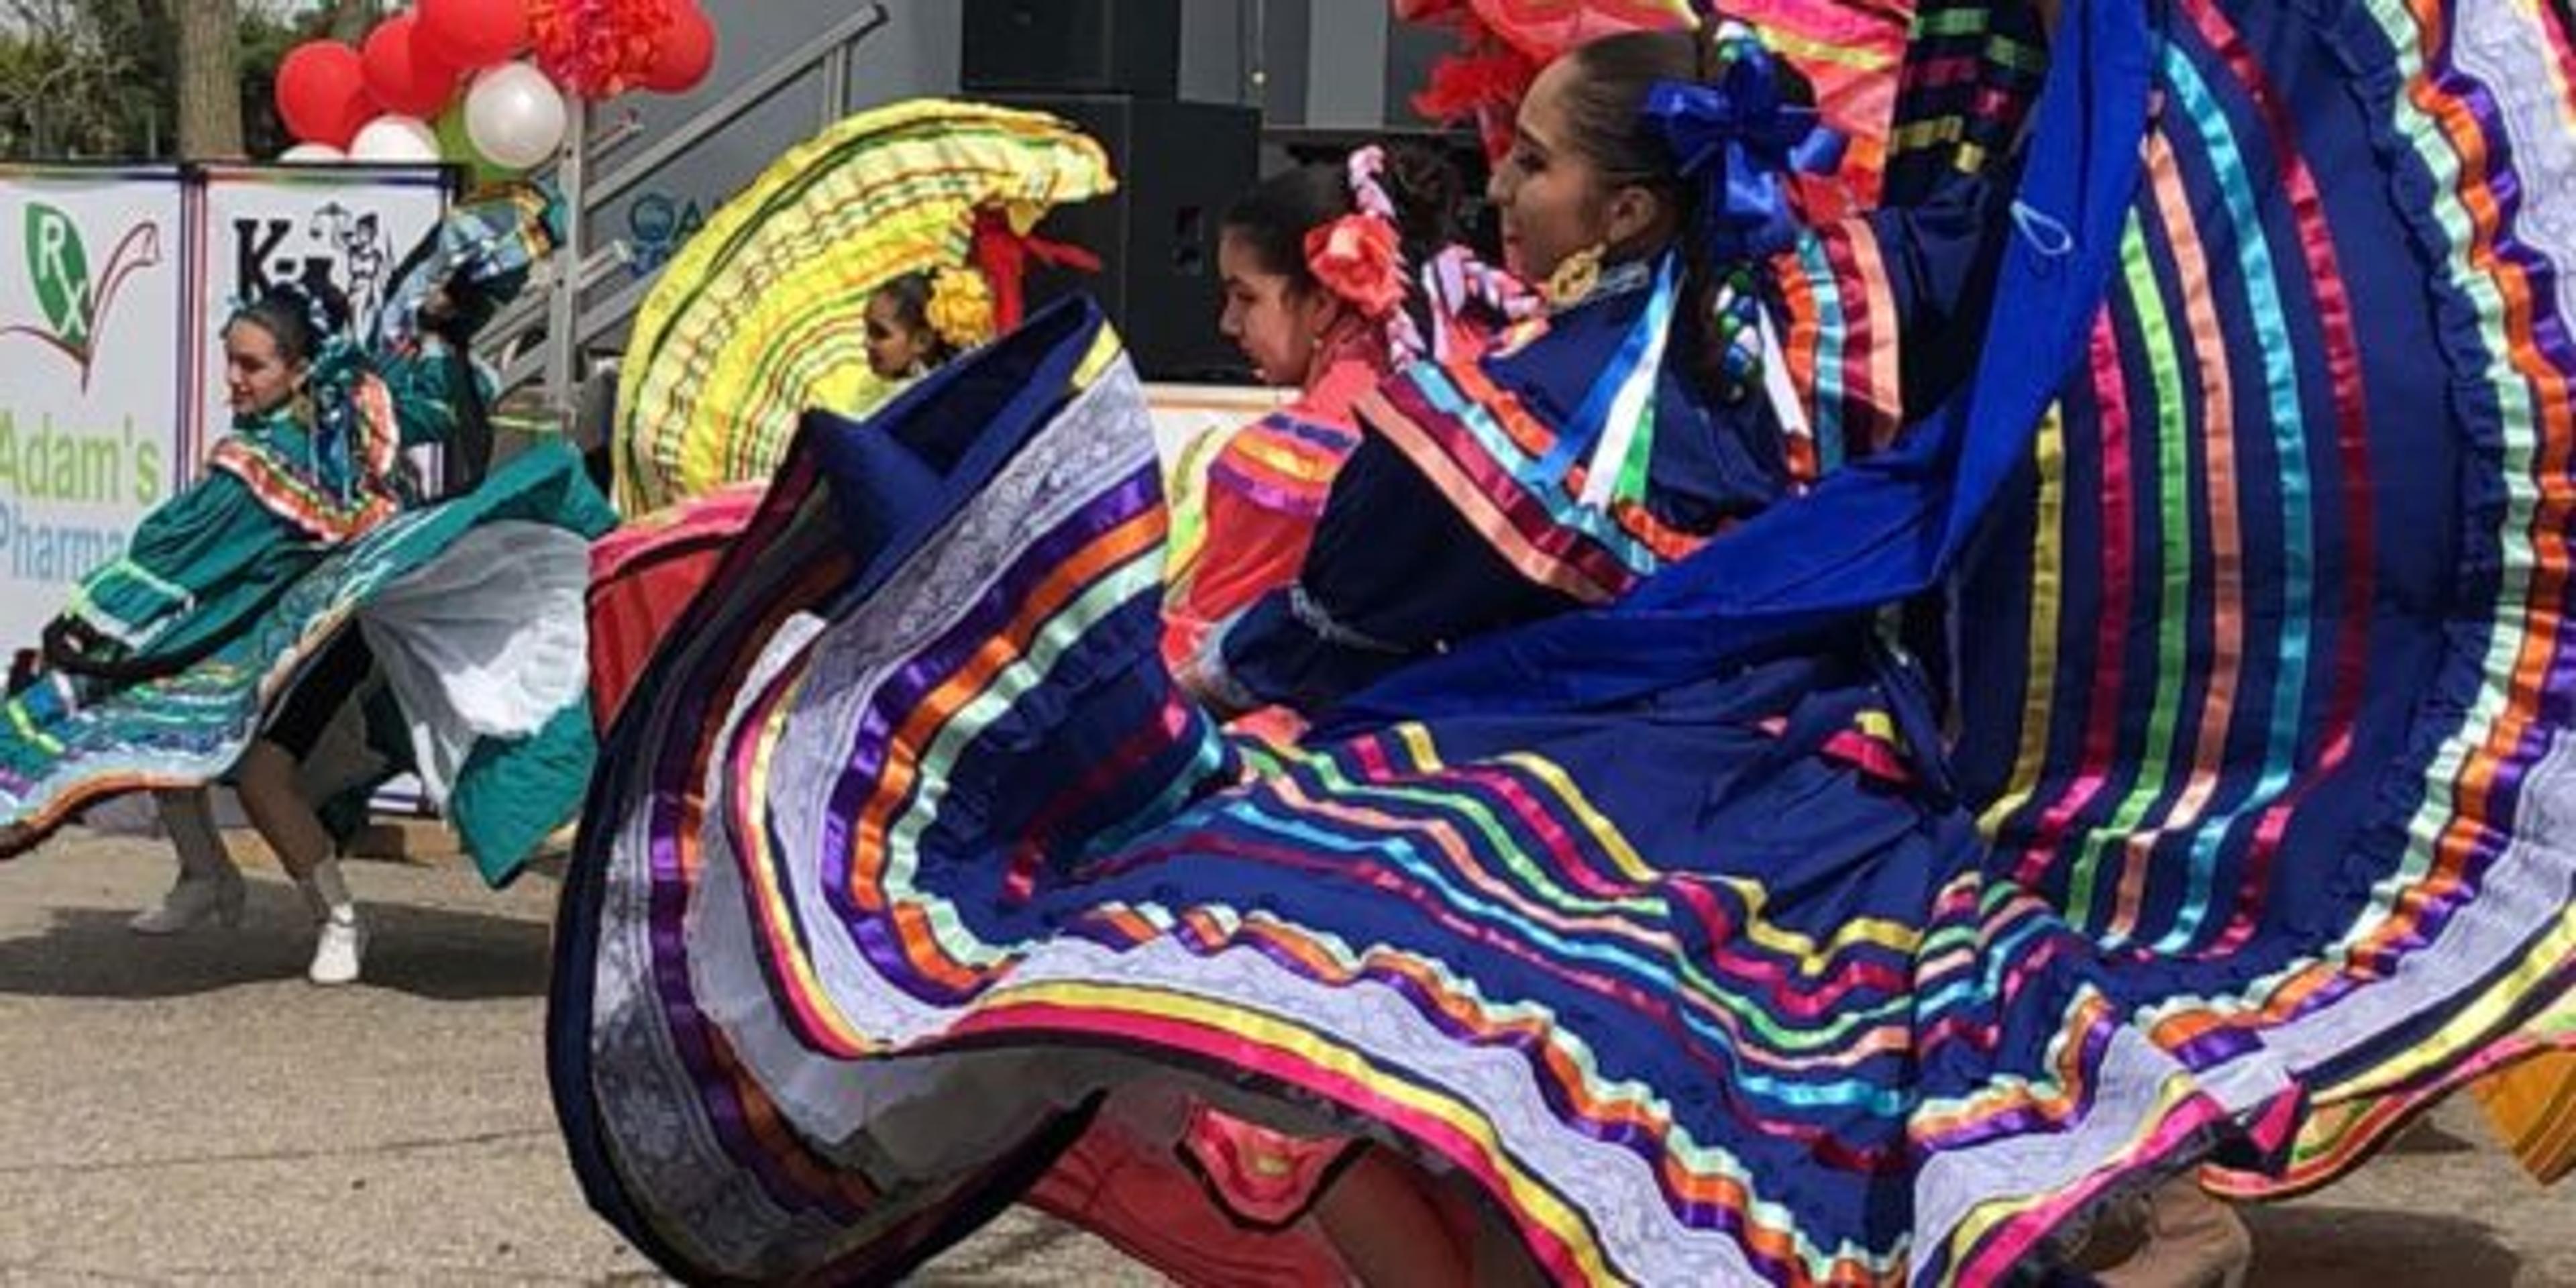 Notable Cinco de Mayo celebrations across Michigan are regaining full strength after two abbreviated years of balancing safety and fun amid the COVID-19 pandemic.  